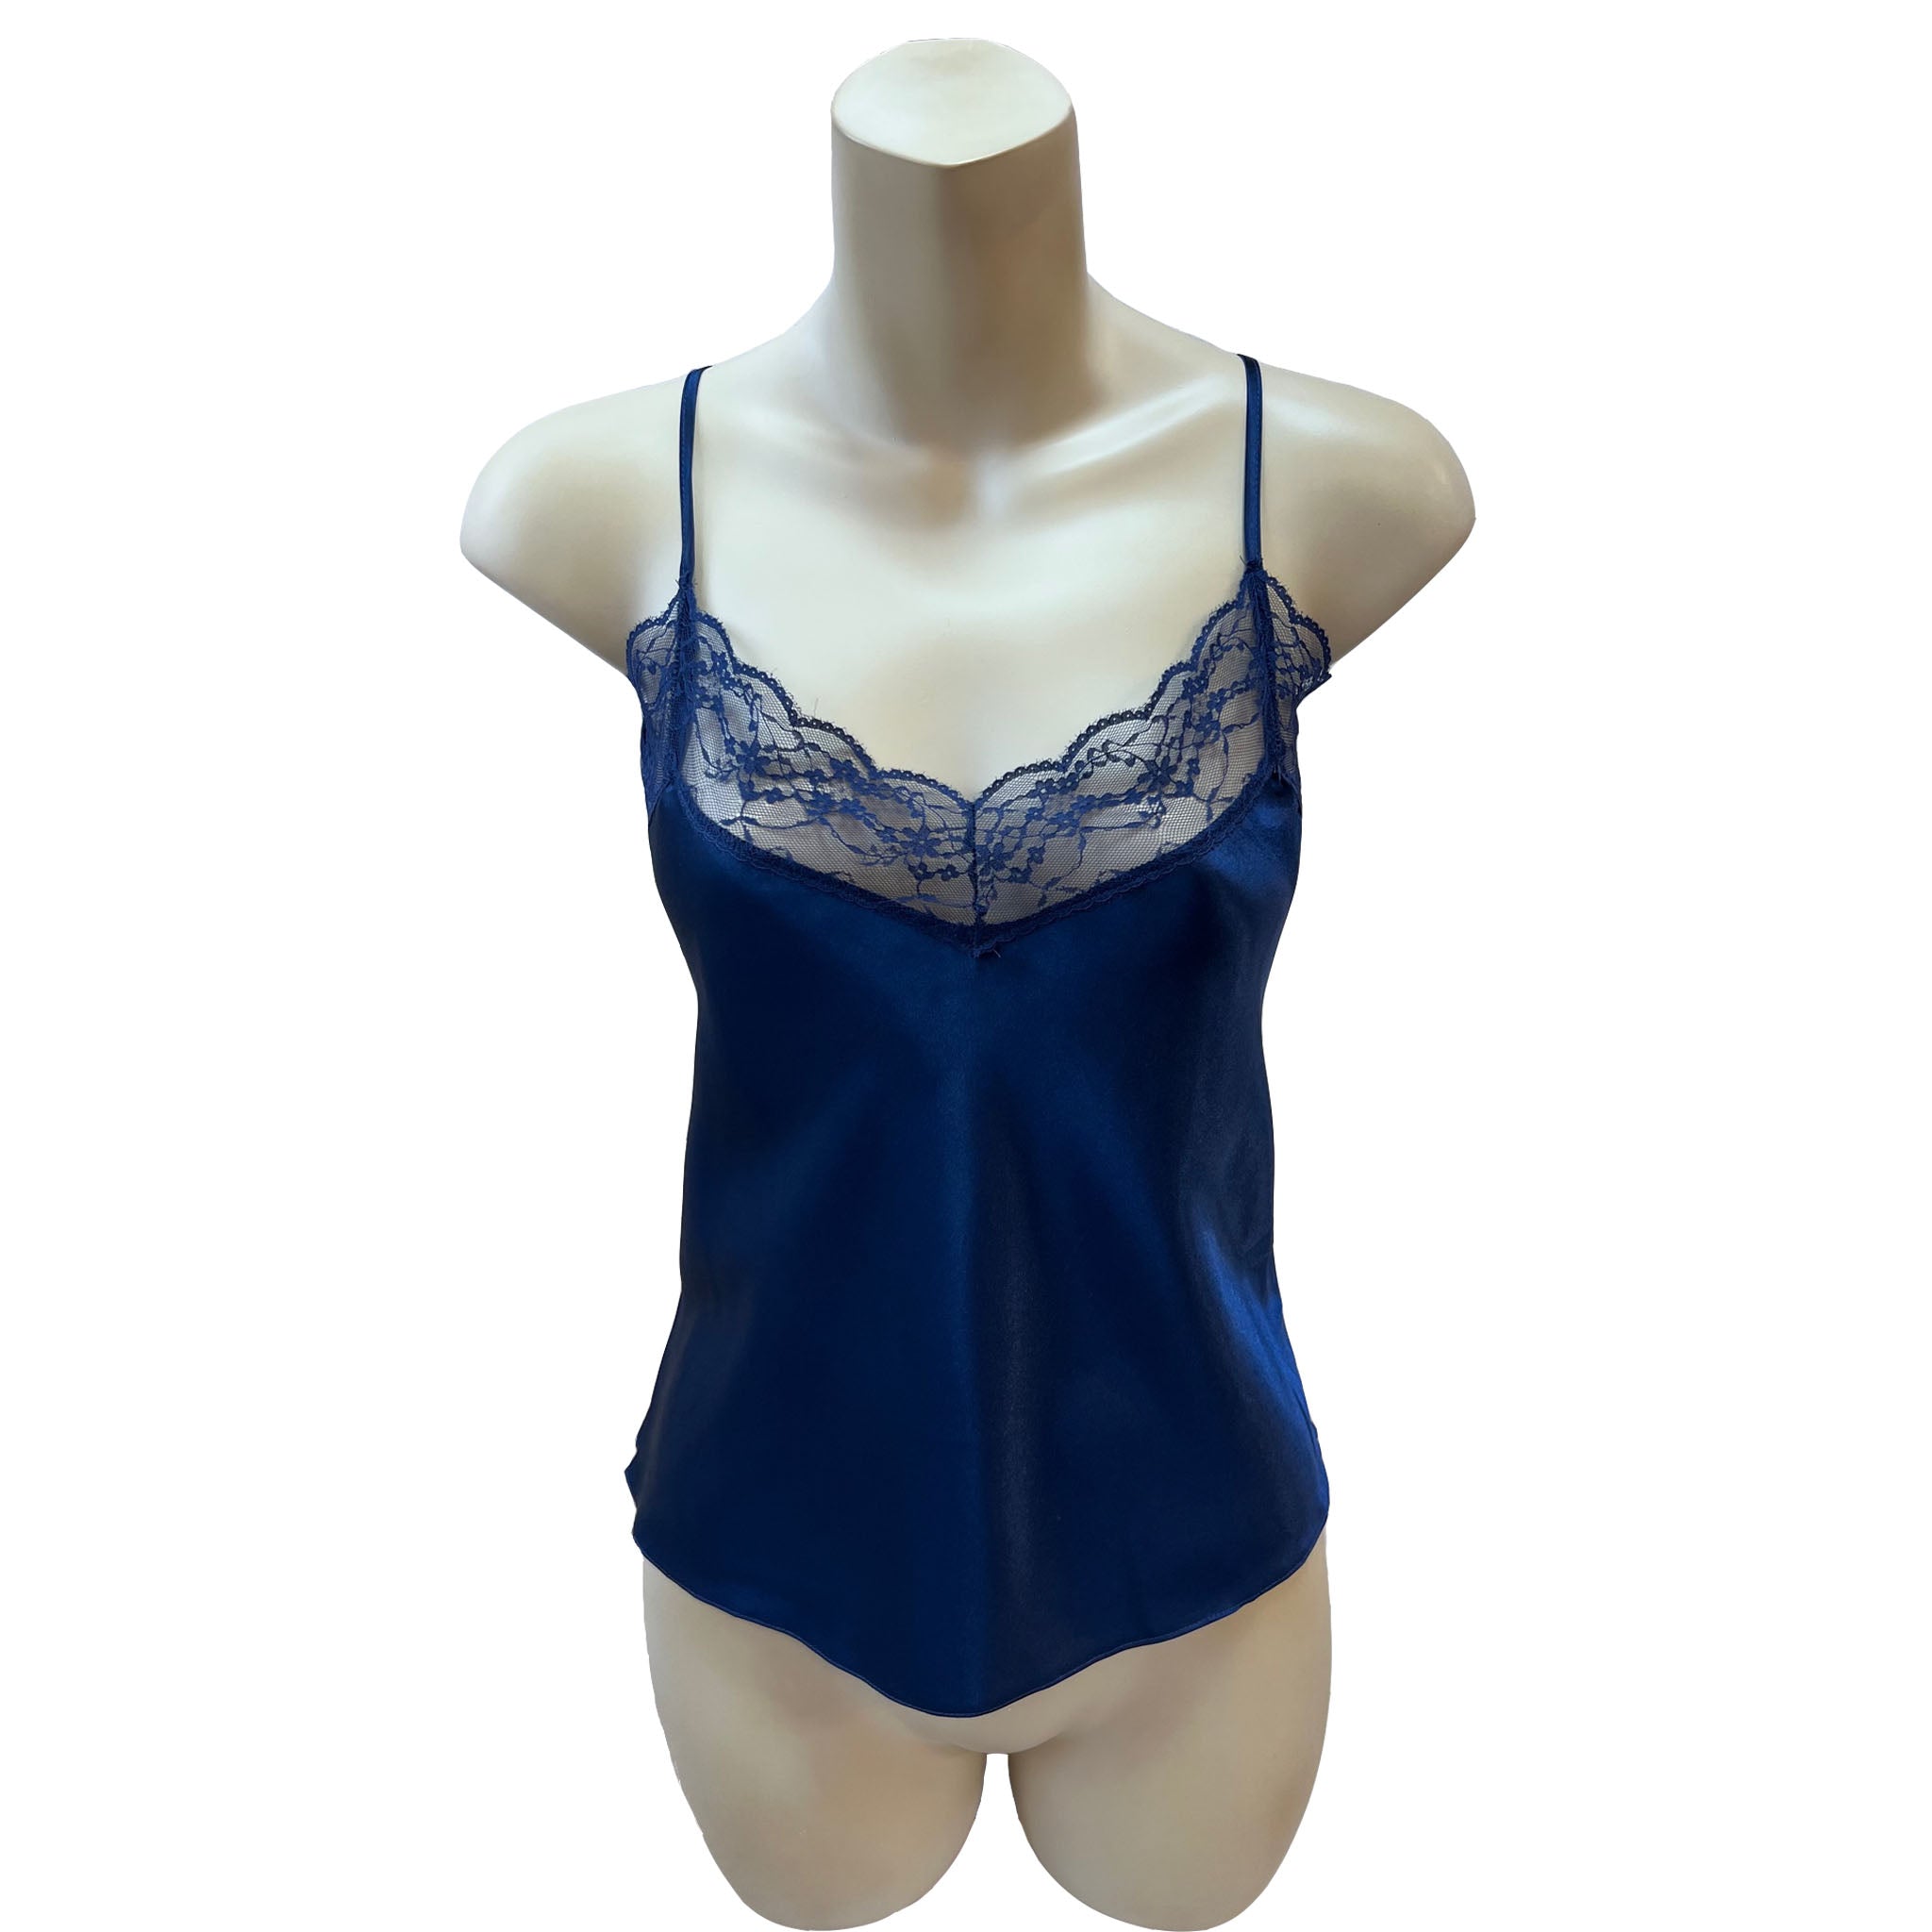 Women's Cami Tops & Vests, Silk & Lace Camisole Tops